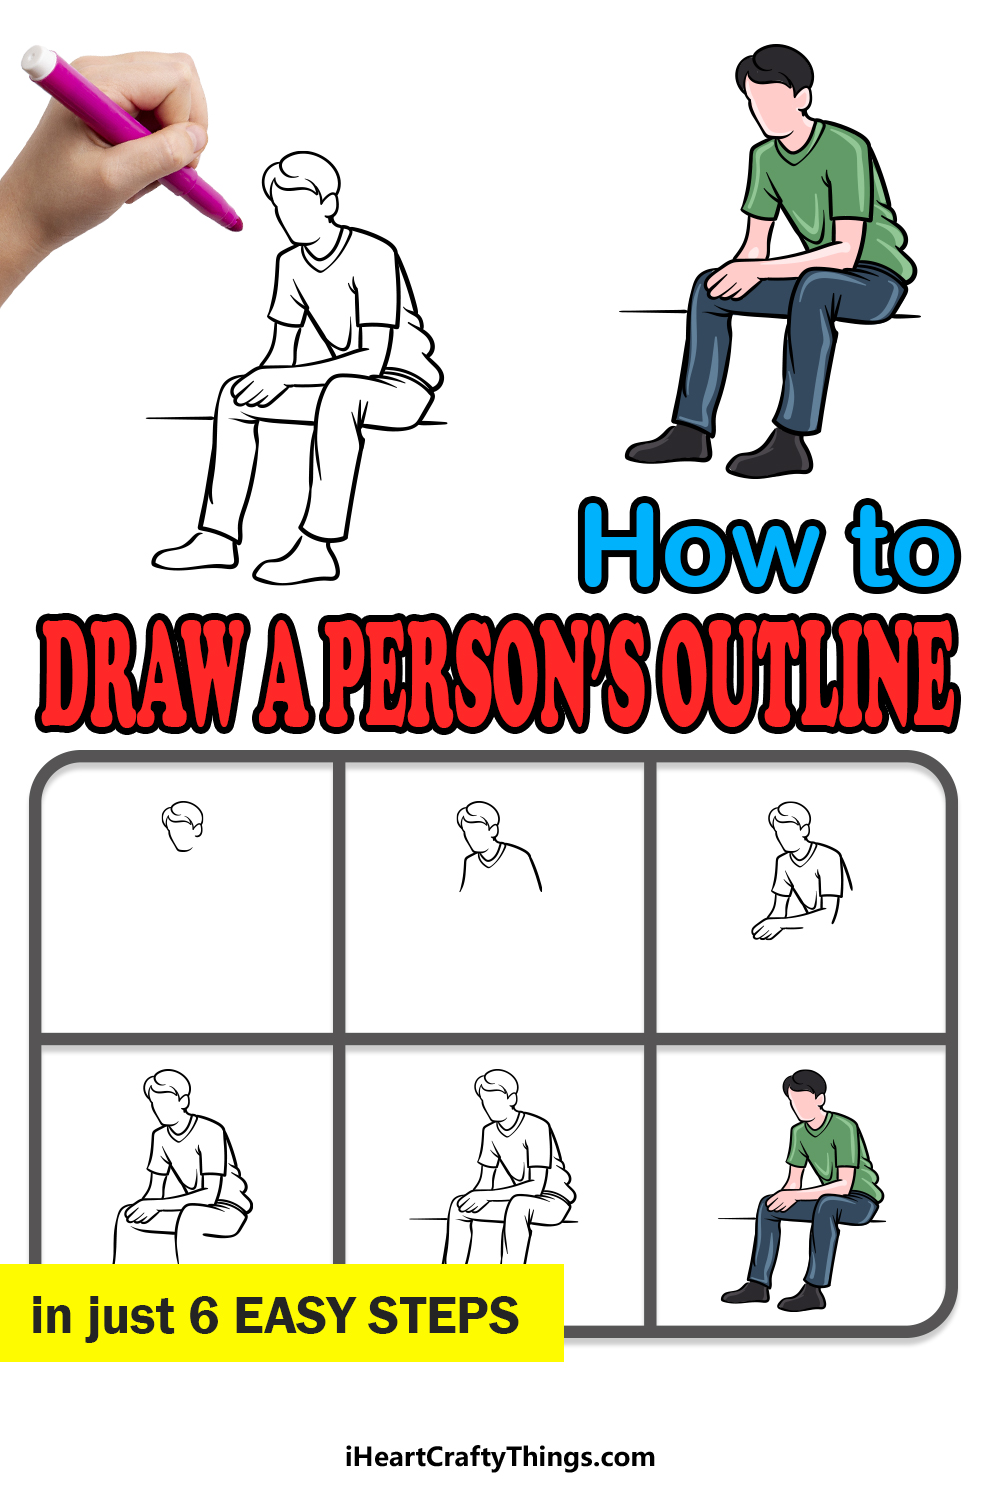 how to draw a Person’s Outline in 6 easy steps